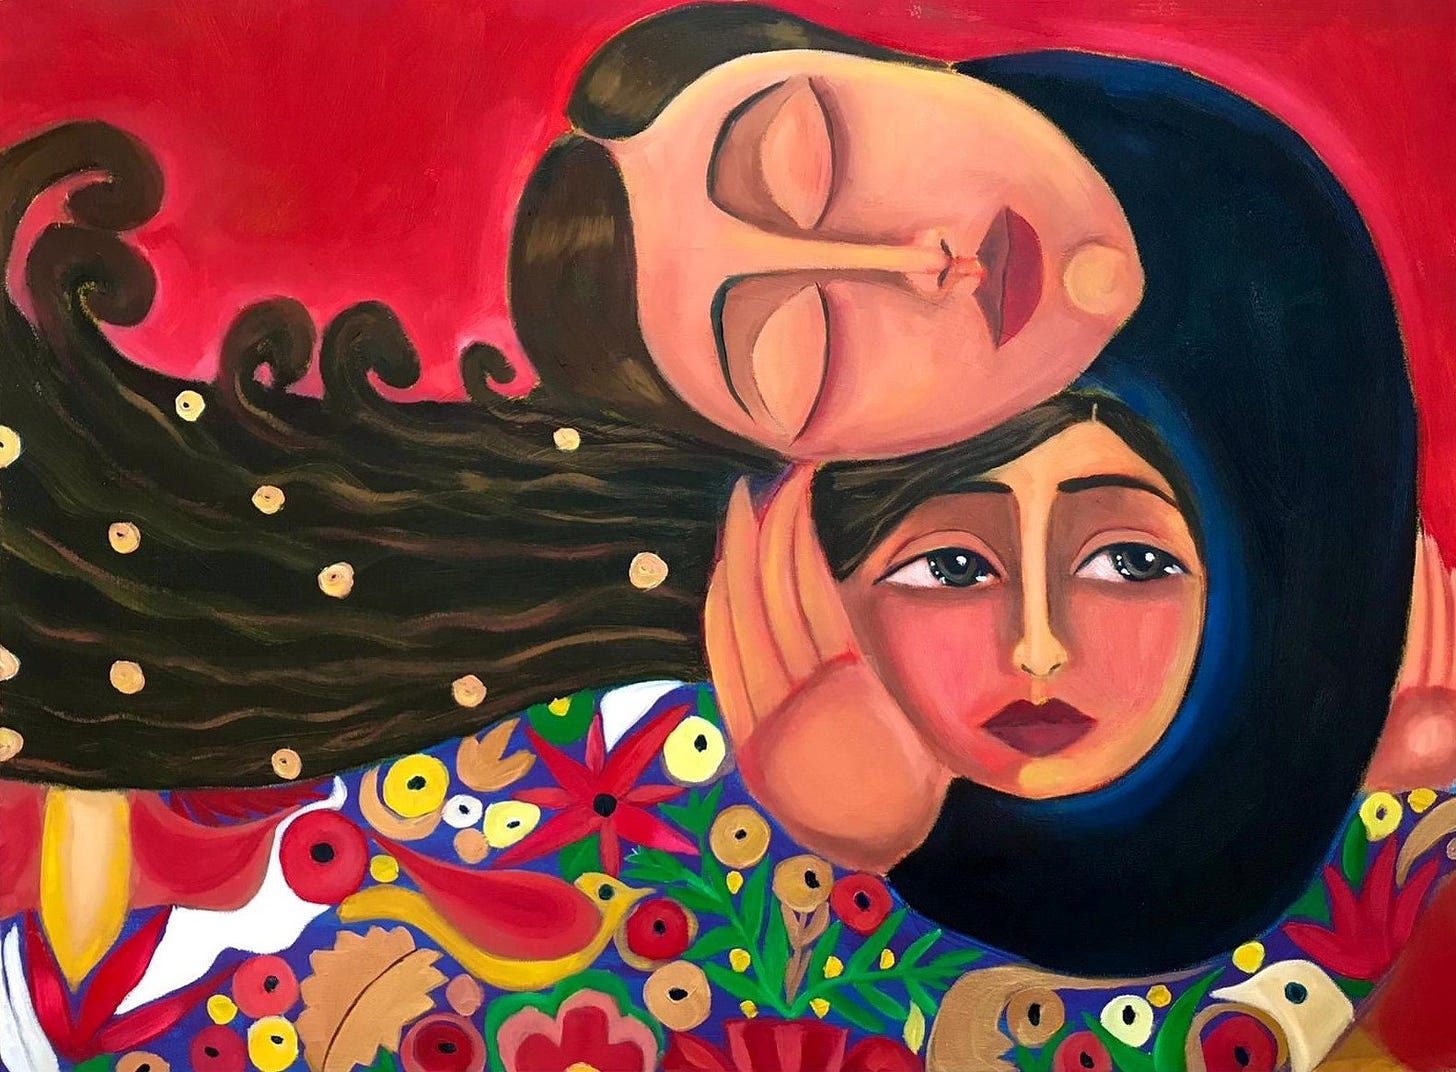 Born of war: How a Palestinian woman responds to trauma through art |  Middle East Eye